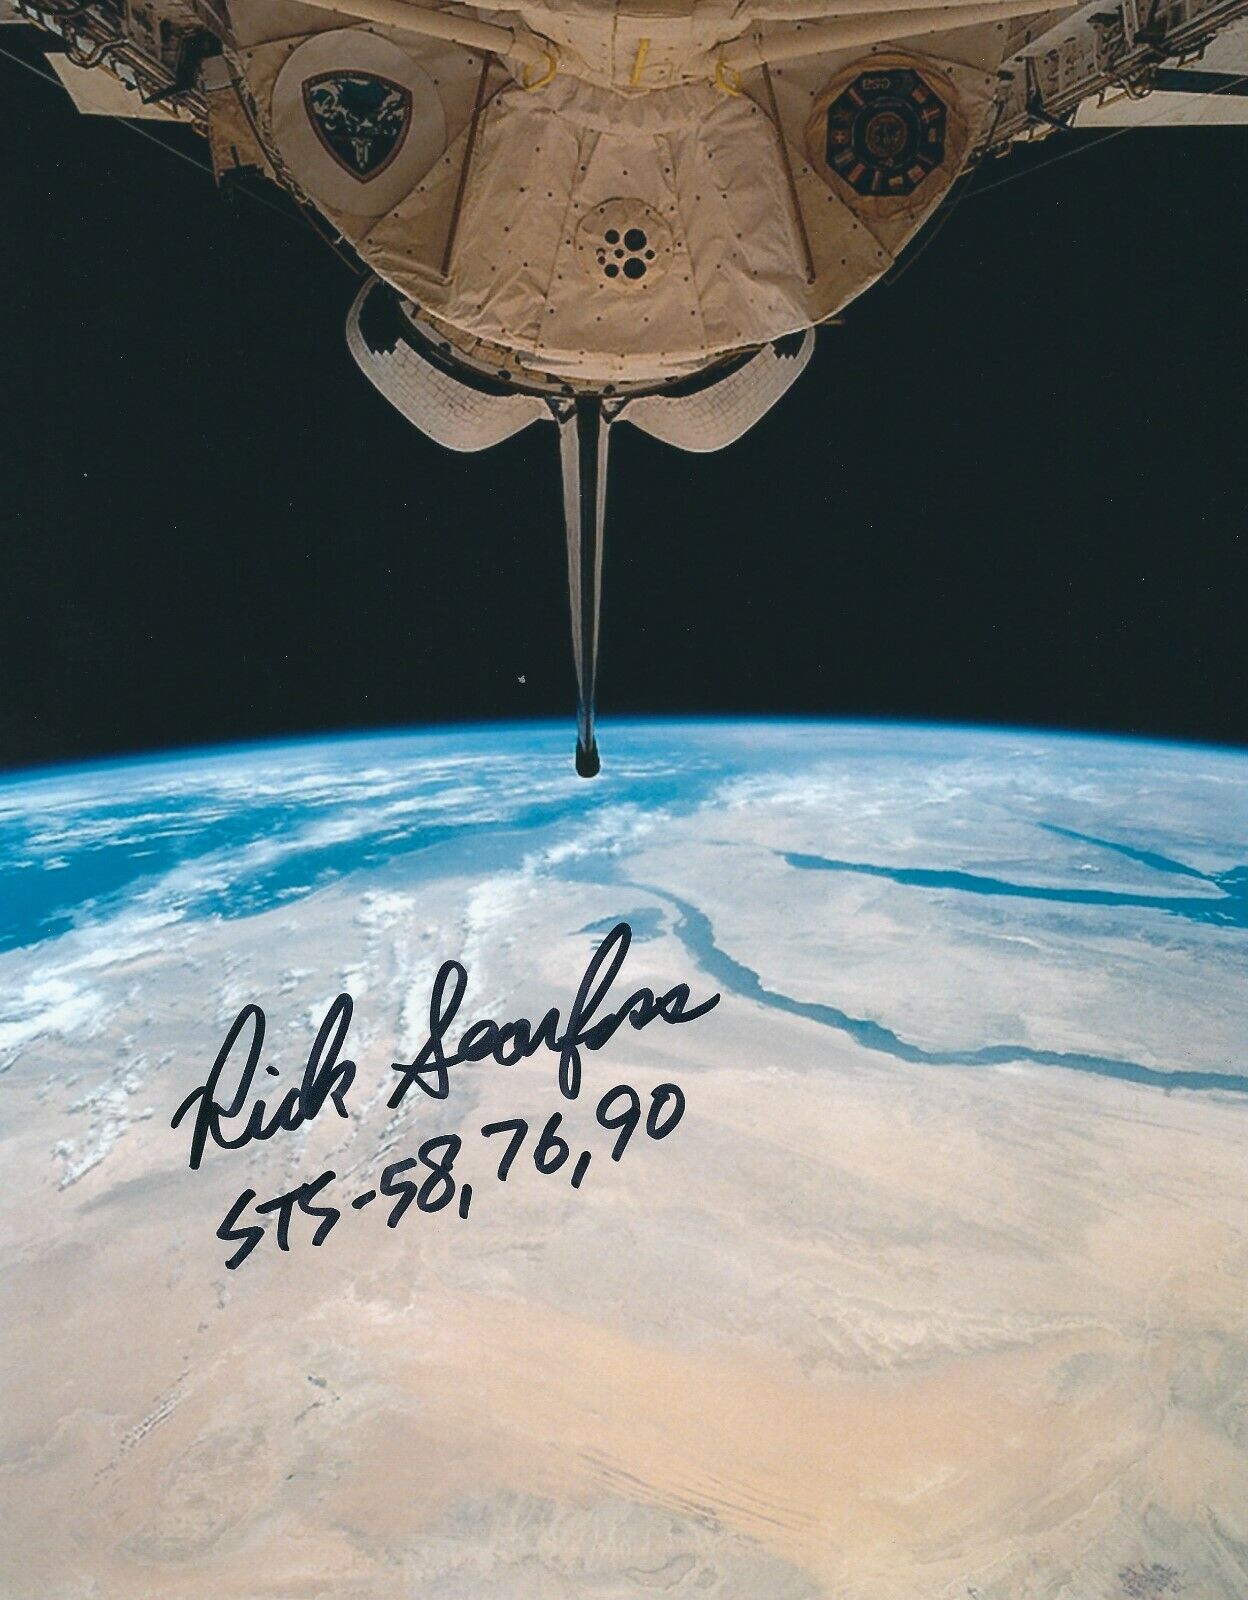 RICK SEARFOSS SIGNED 8x10 Photo Poster painting - SPACE SHUTTLE STS 58 76 90 - UACC RD AUTOGRAPH